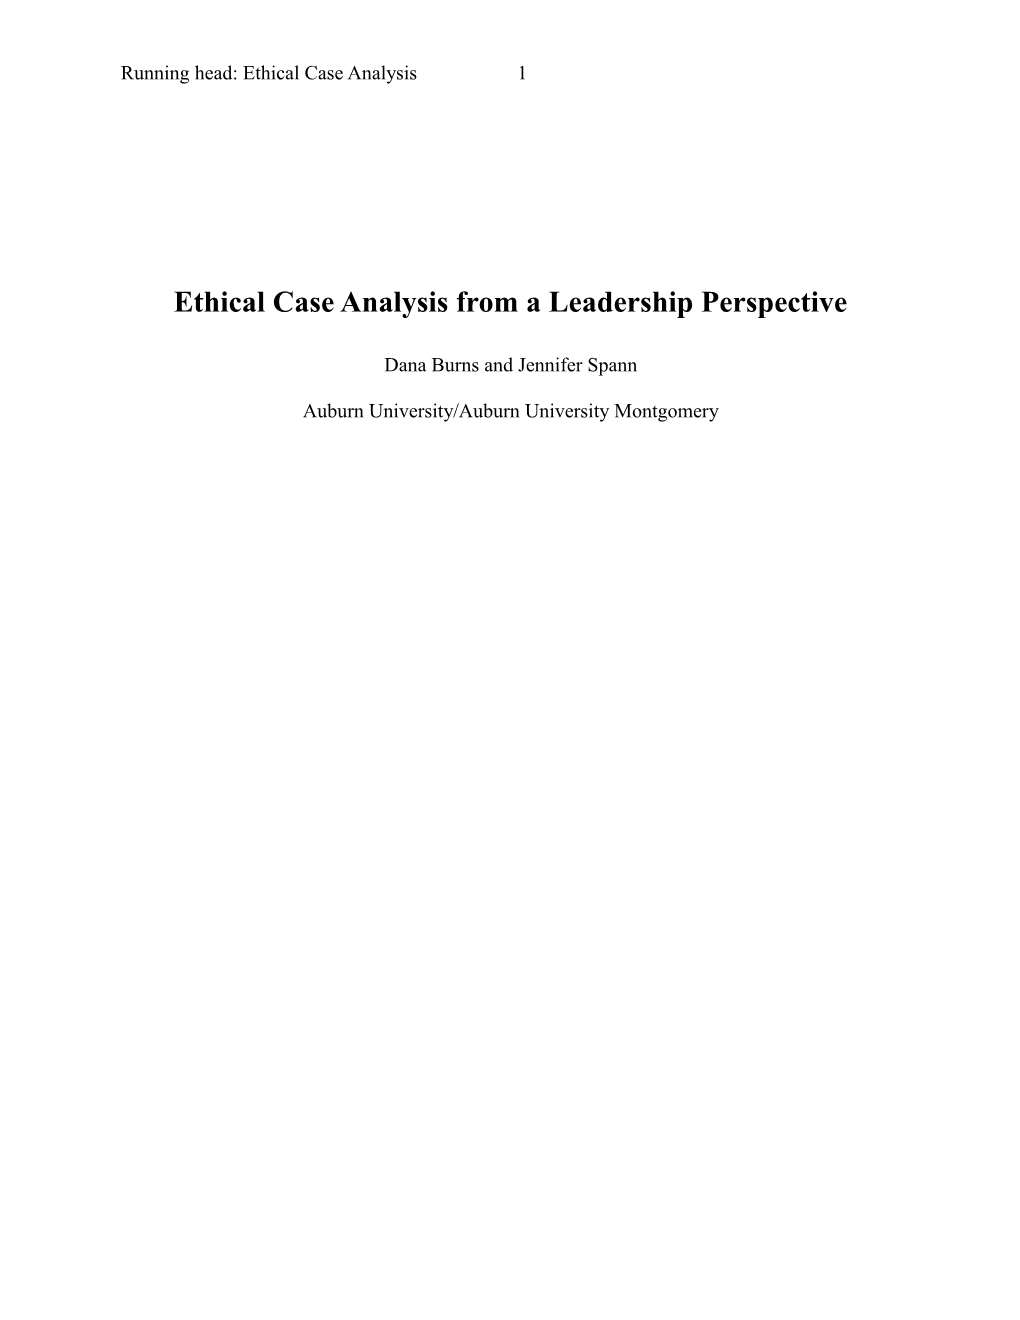 Ethical Case Analysis from a Leadership Perspective